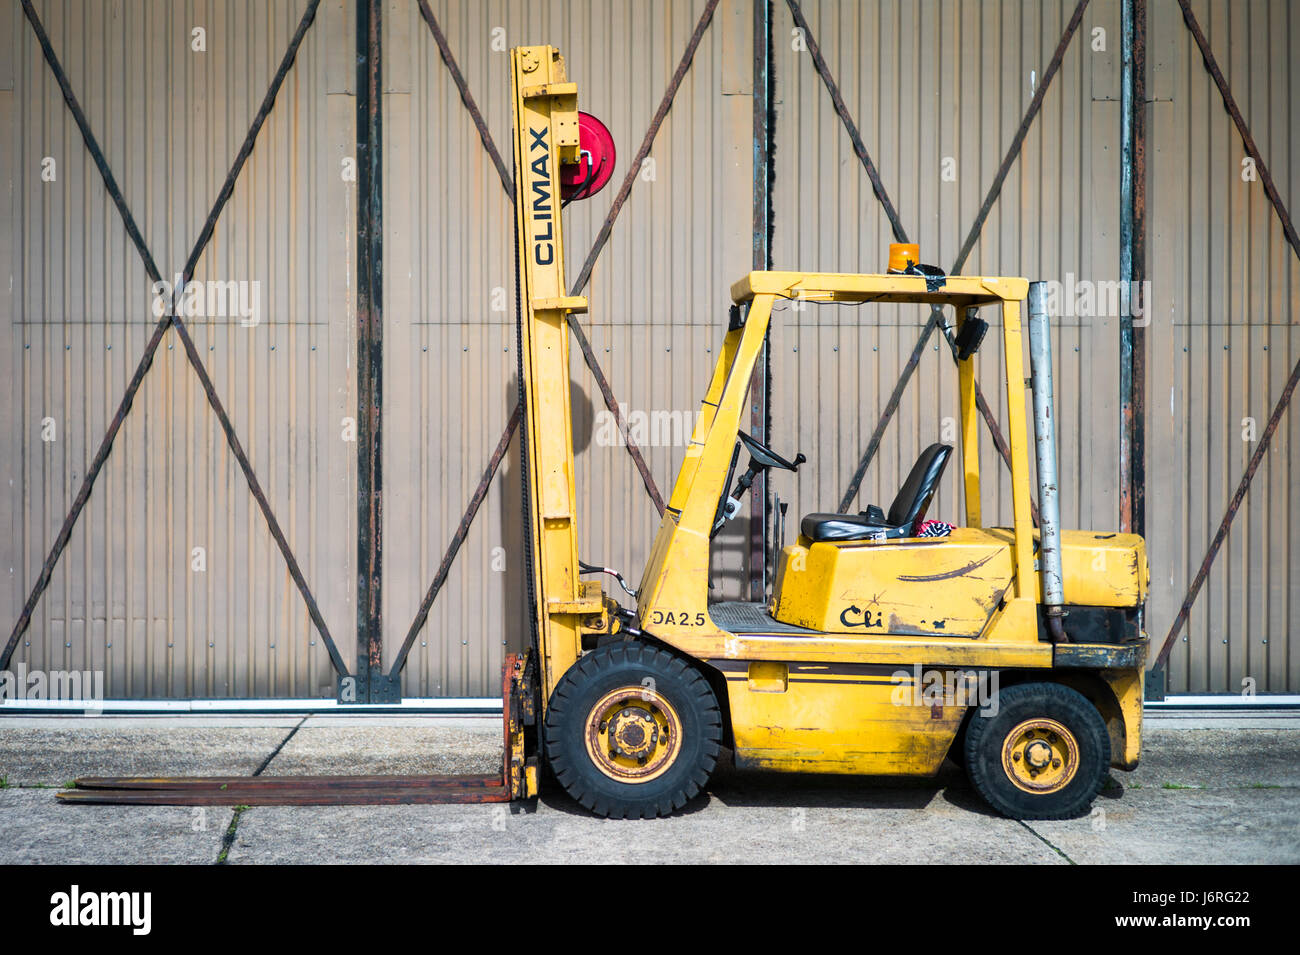 Climax Fork Lift Truck outside a warehouse hanger building Stock Photo